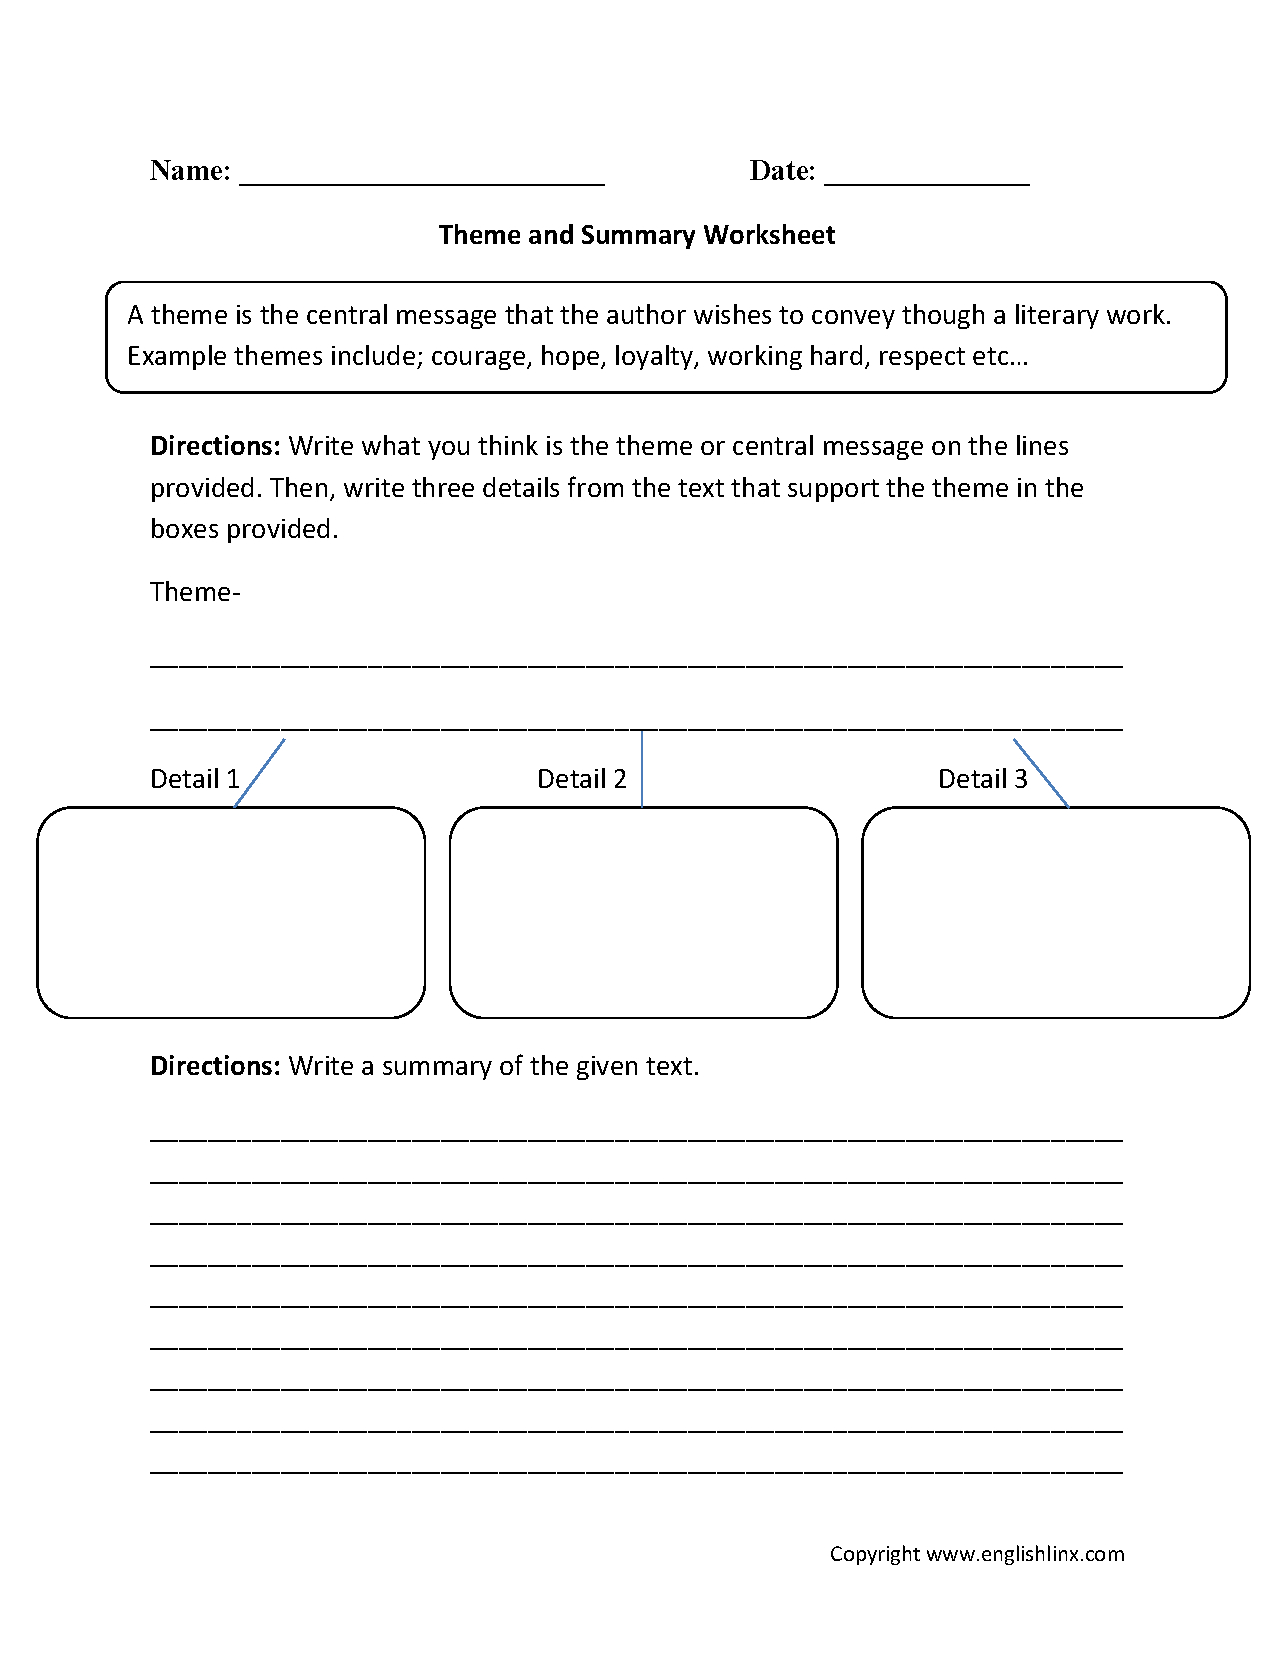 Englishlinx  Theme Worksheets Regarding Finding The Theme Of A Story Worksheets